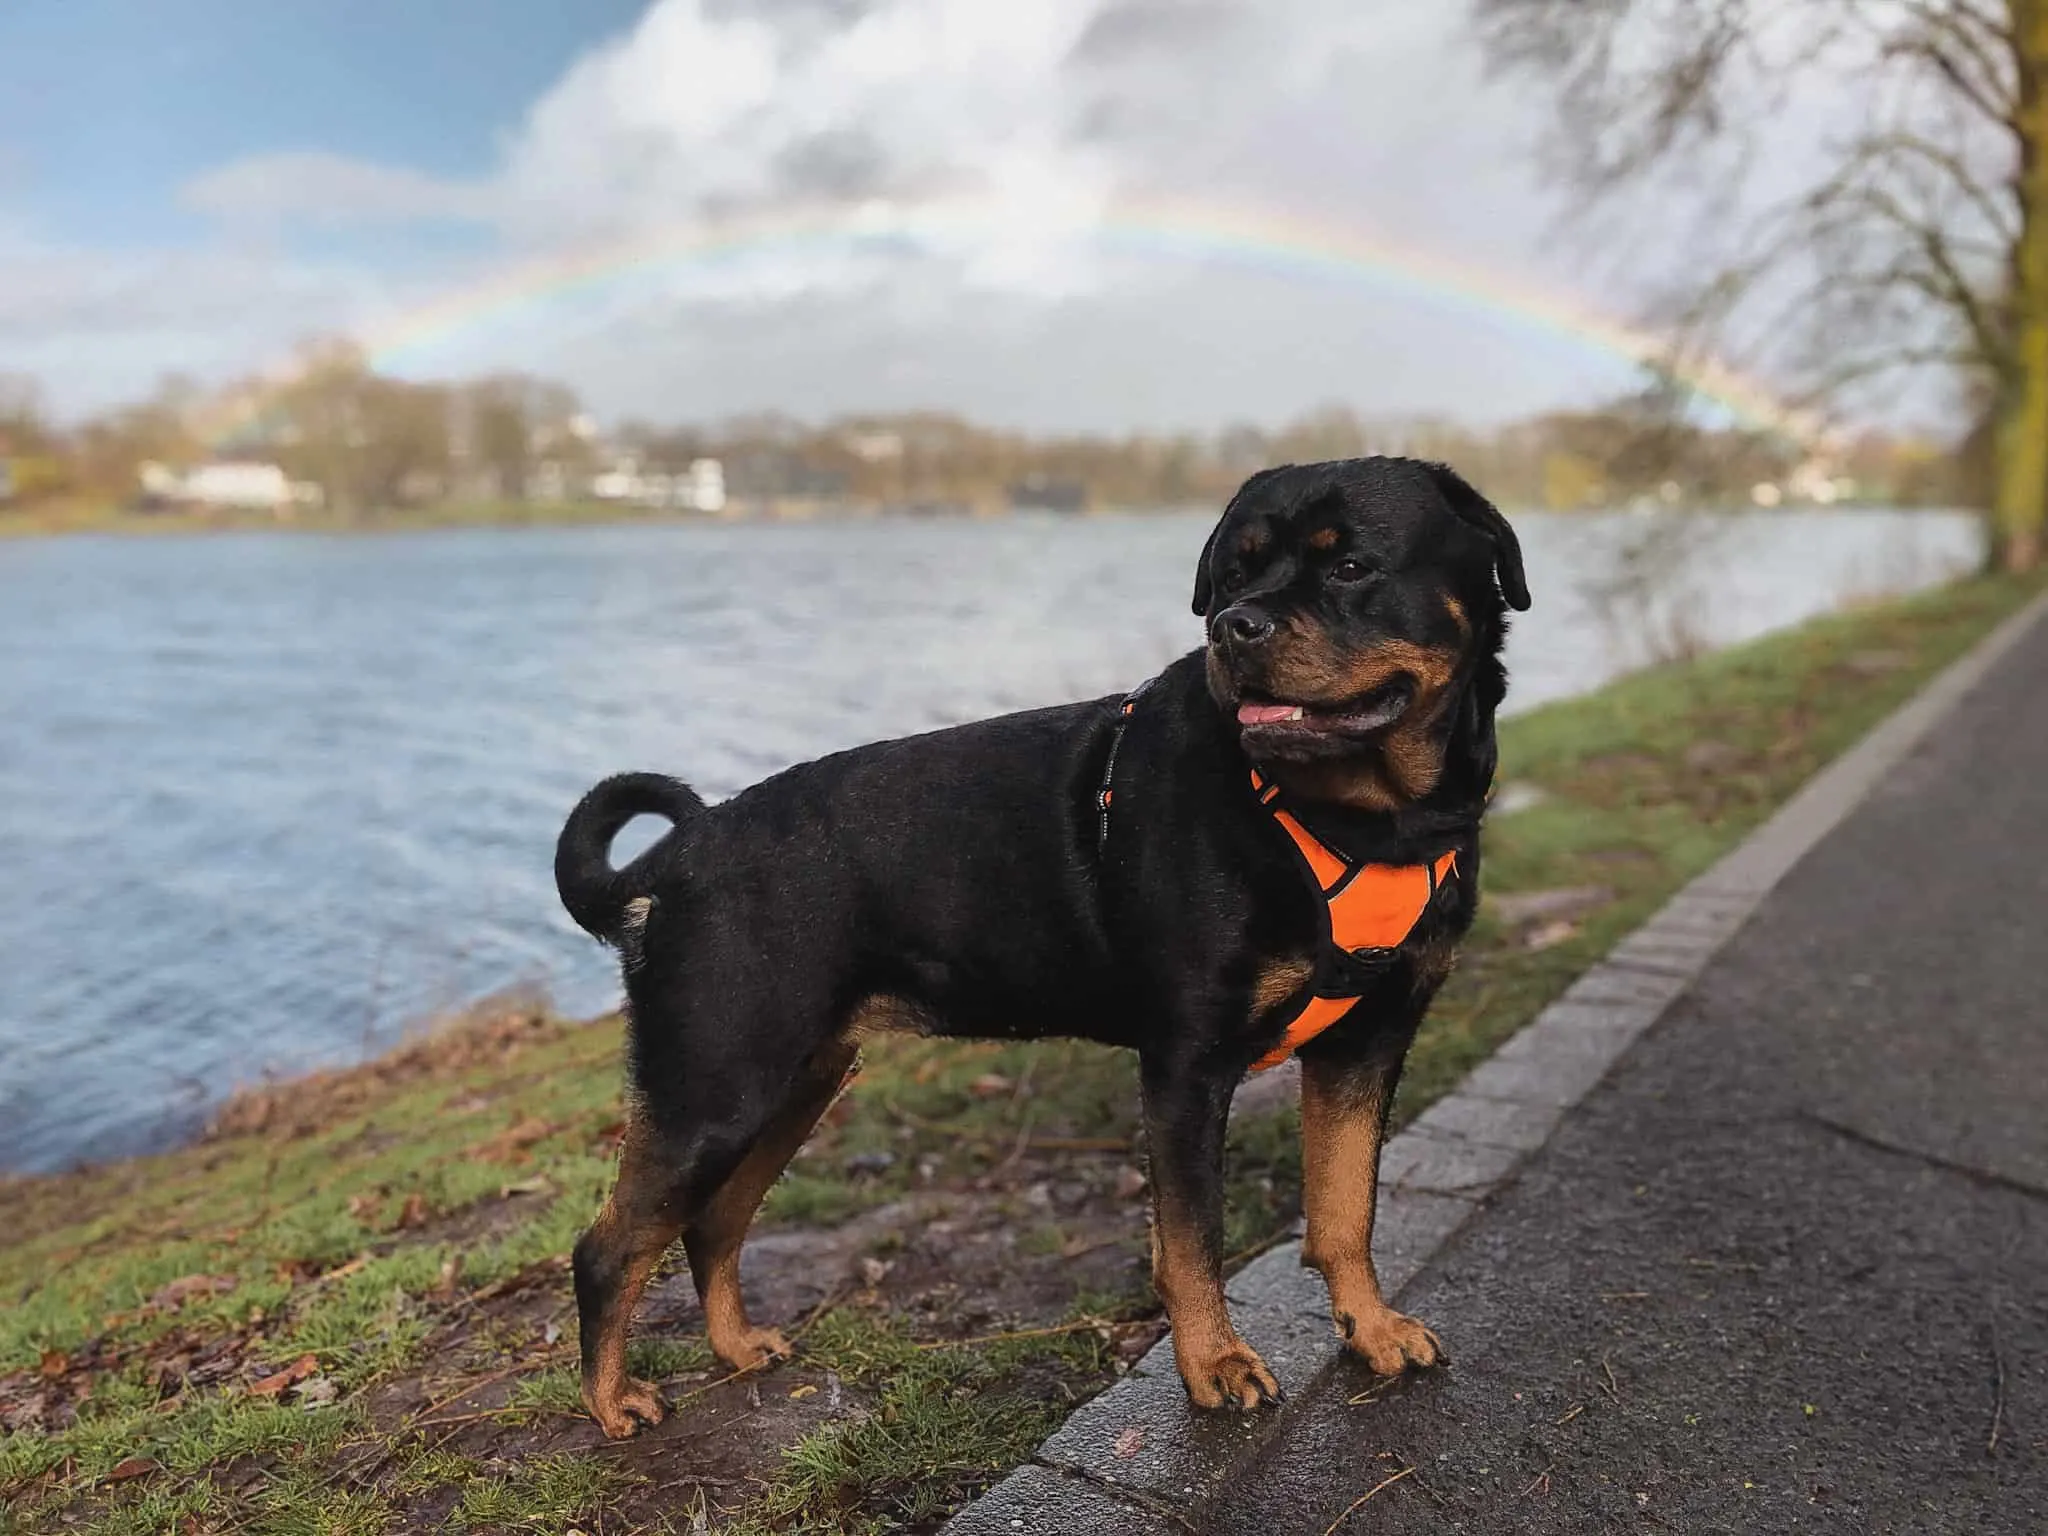 My beautiful Rottweiler girl Amalia who is great with kids is standing in front of a rainbow.